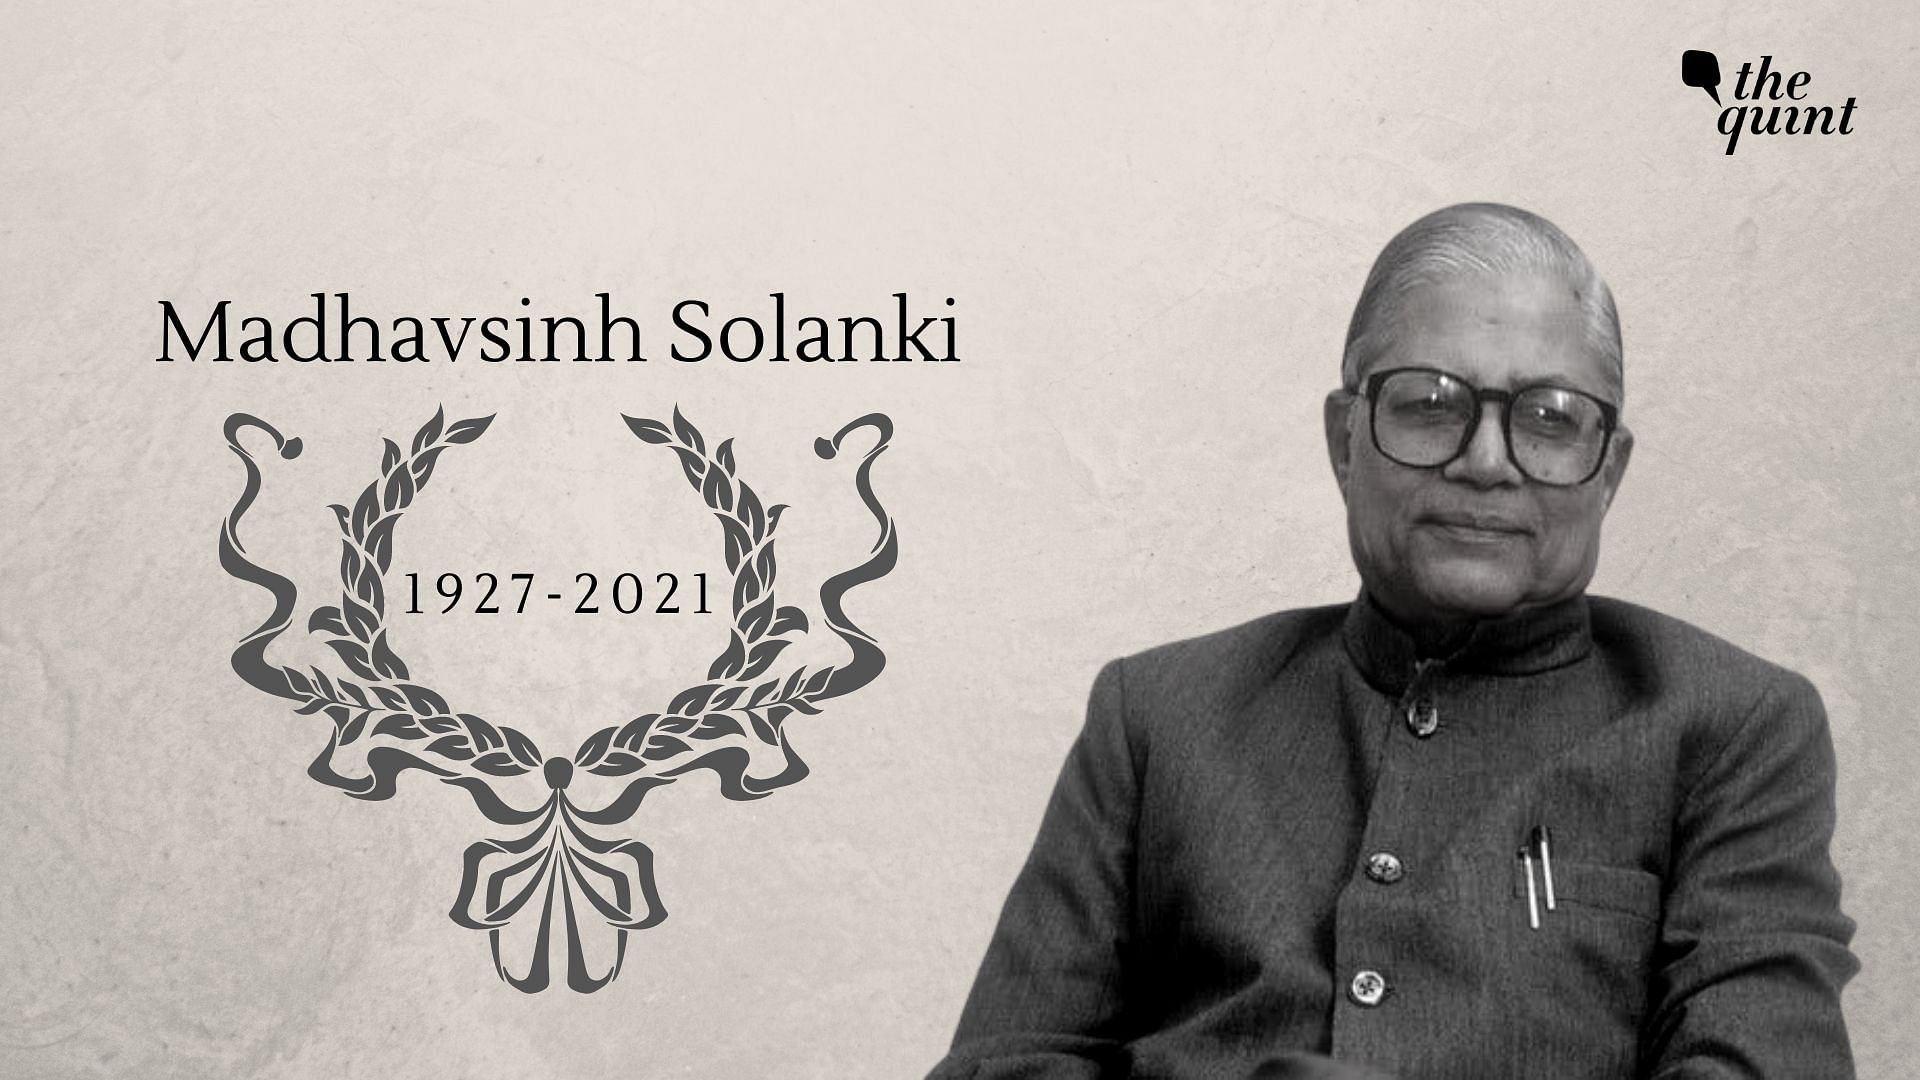 Veteran Congress leader and former chief minister of Gujarat, Madhavsinh Solanki passed away on Saturday, 9 January at the age of 93.